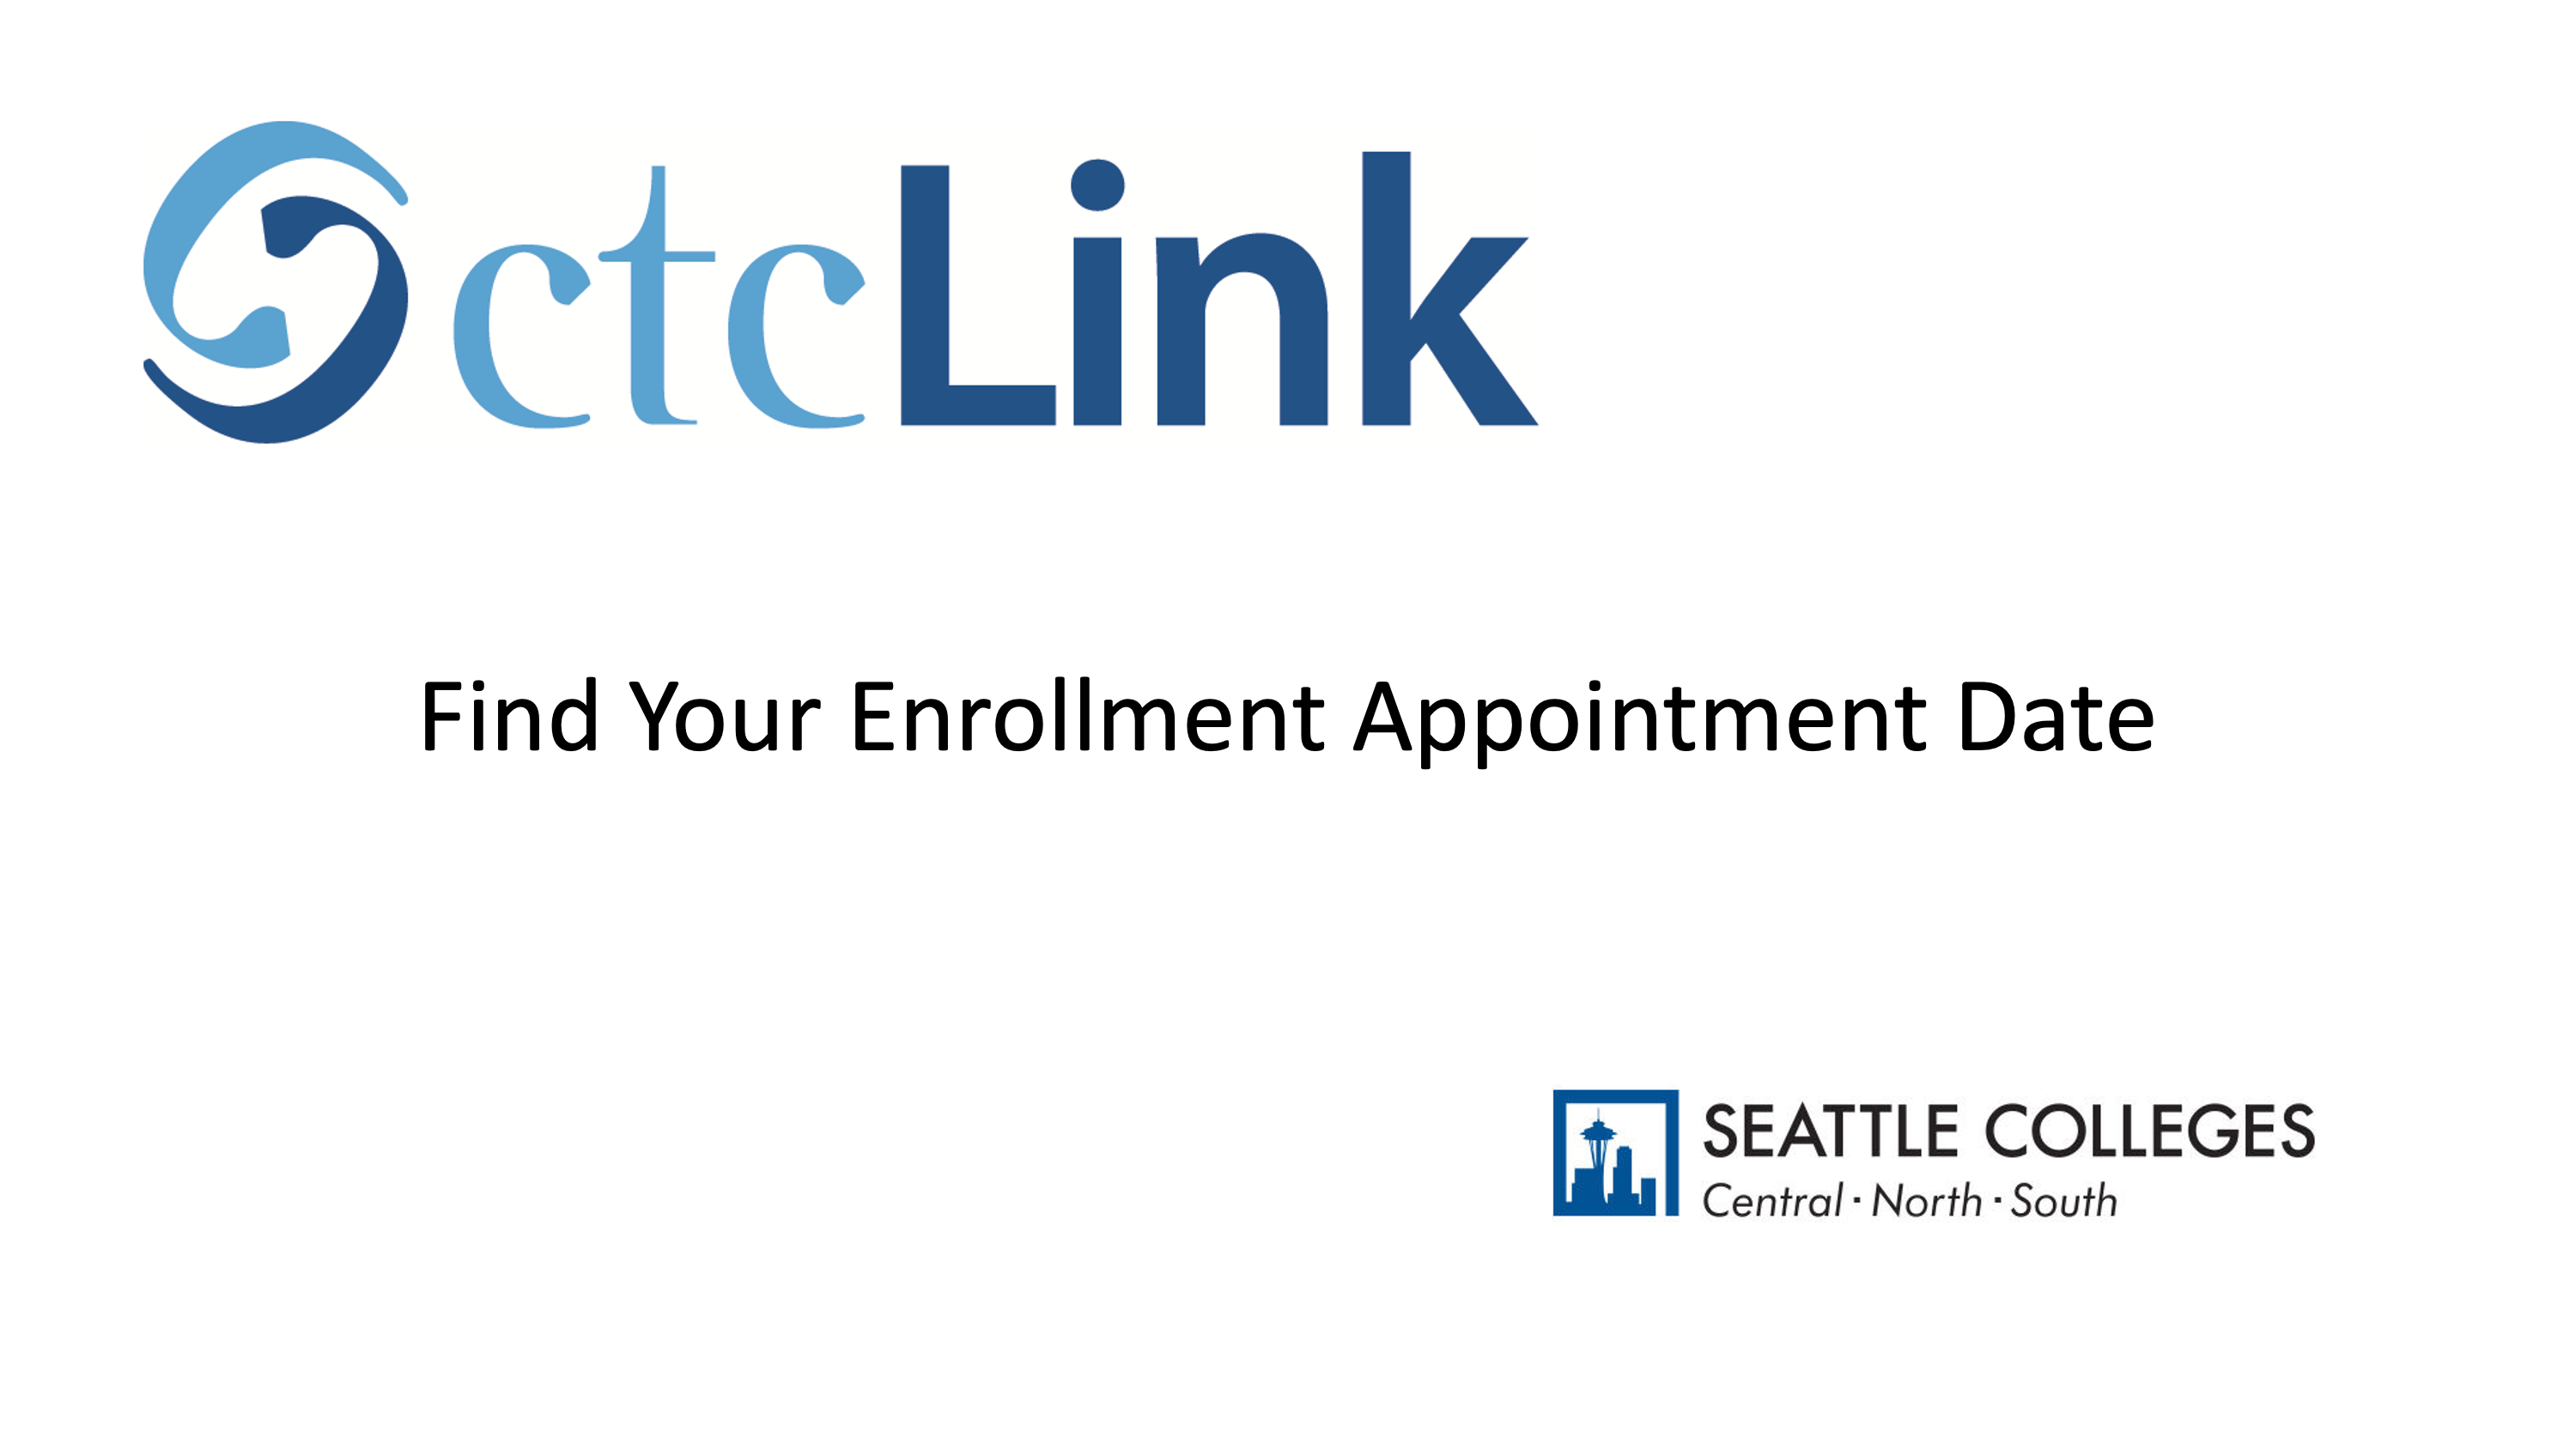 Find Your Enrollment Appointment Date